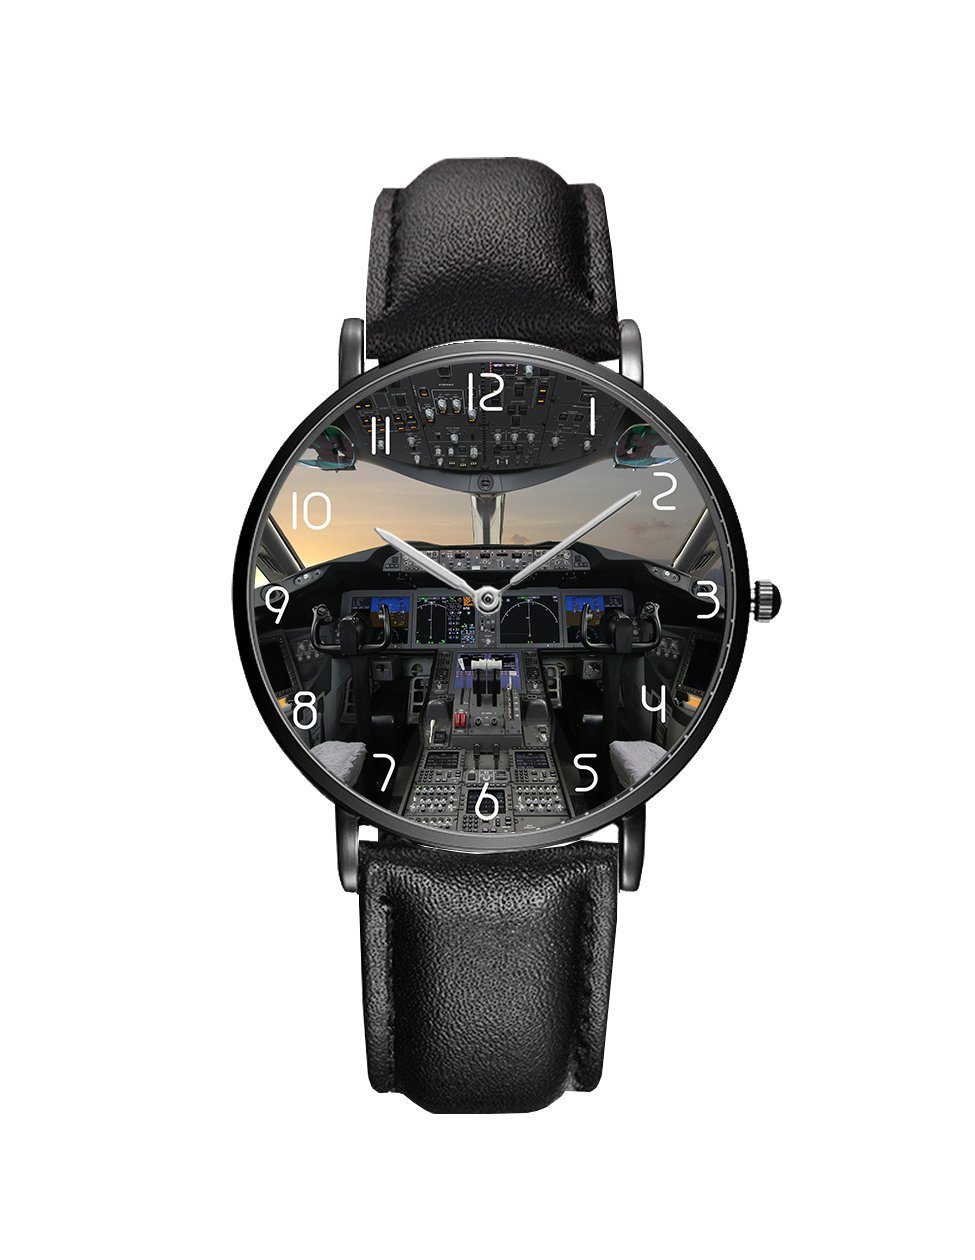 Boeing 787 Cockpit Leather Strap Watches Pilot Eyes Store Black & Black Leather Strap 